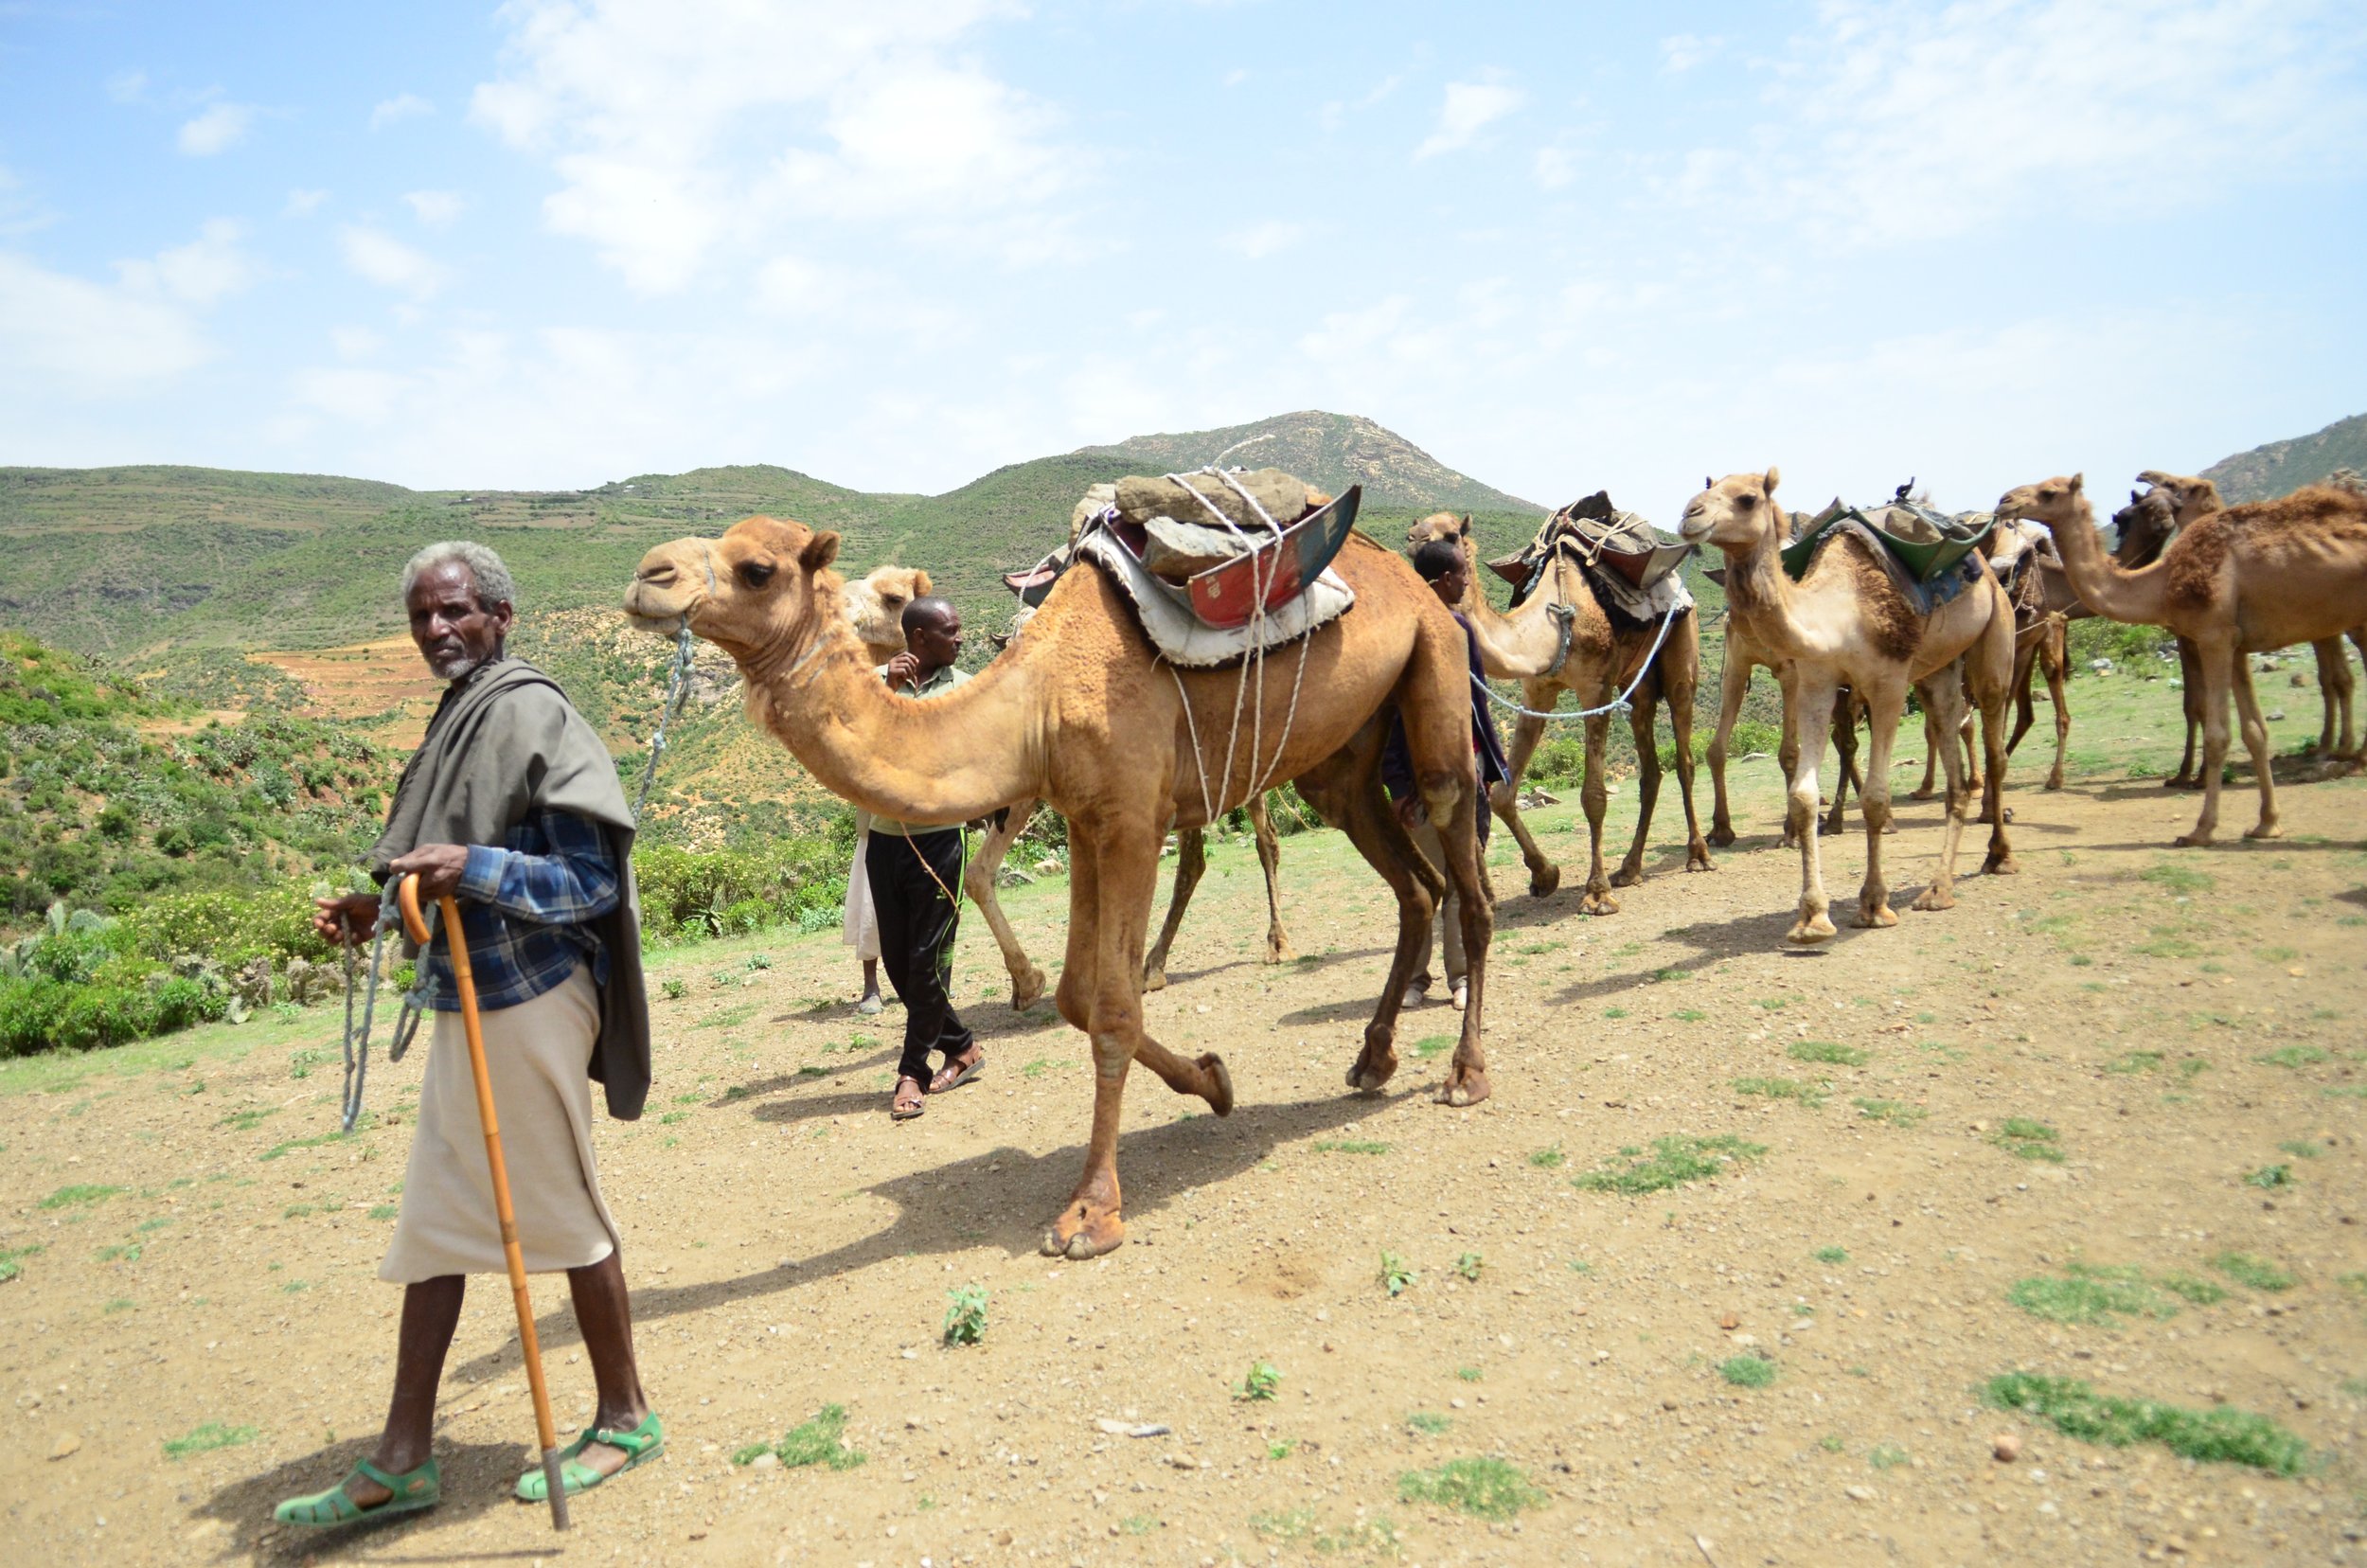 Gonoq DBH-transporting const. materials by camels-052016-H16_9982 (26).JPG